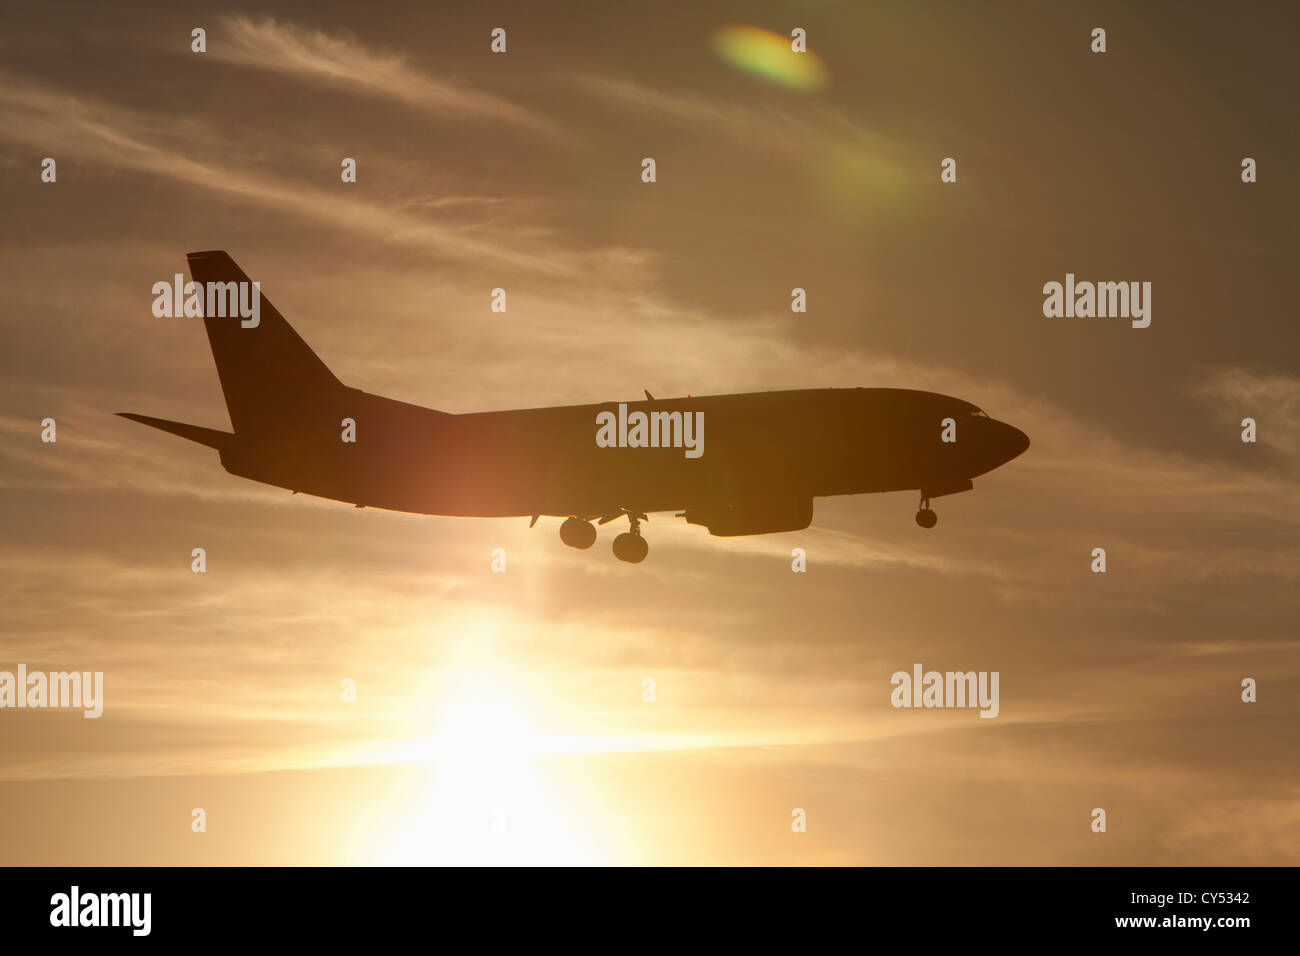 Silhouette of commercial jet flying Stock Photo